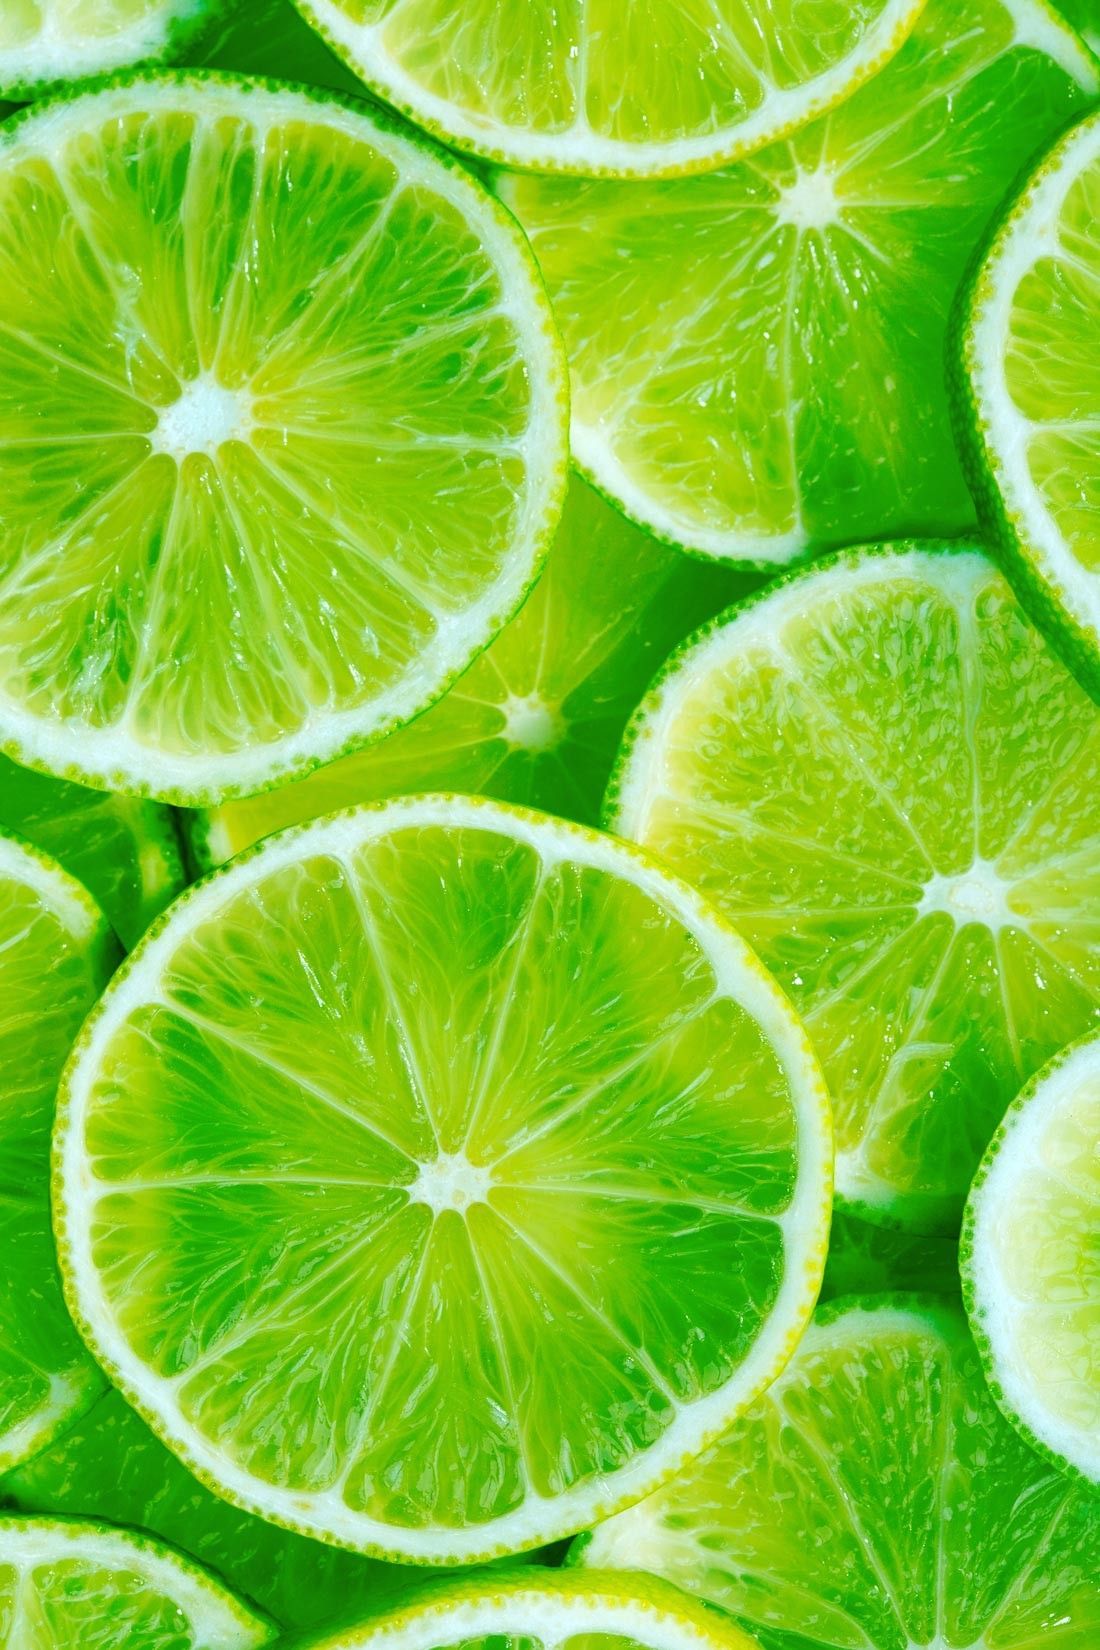 Lime Slices Wall Mural: Edibles: Fruits: These vibrant lime slices will add a pop of color or highlight to any. Green aesthetic, Green picture, Fruit photography